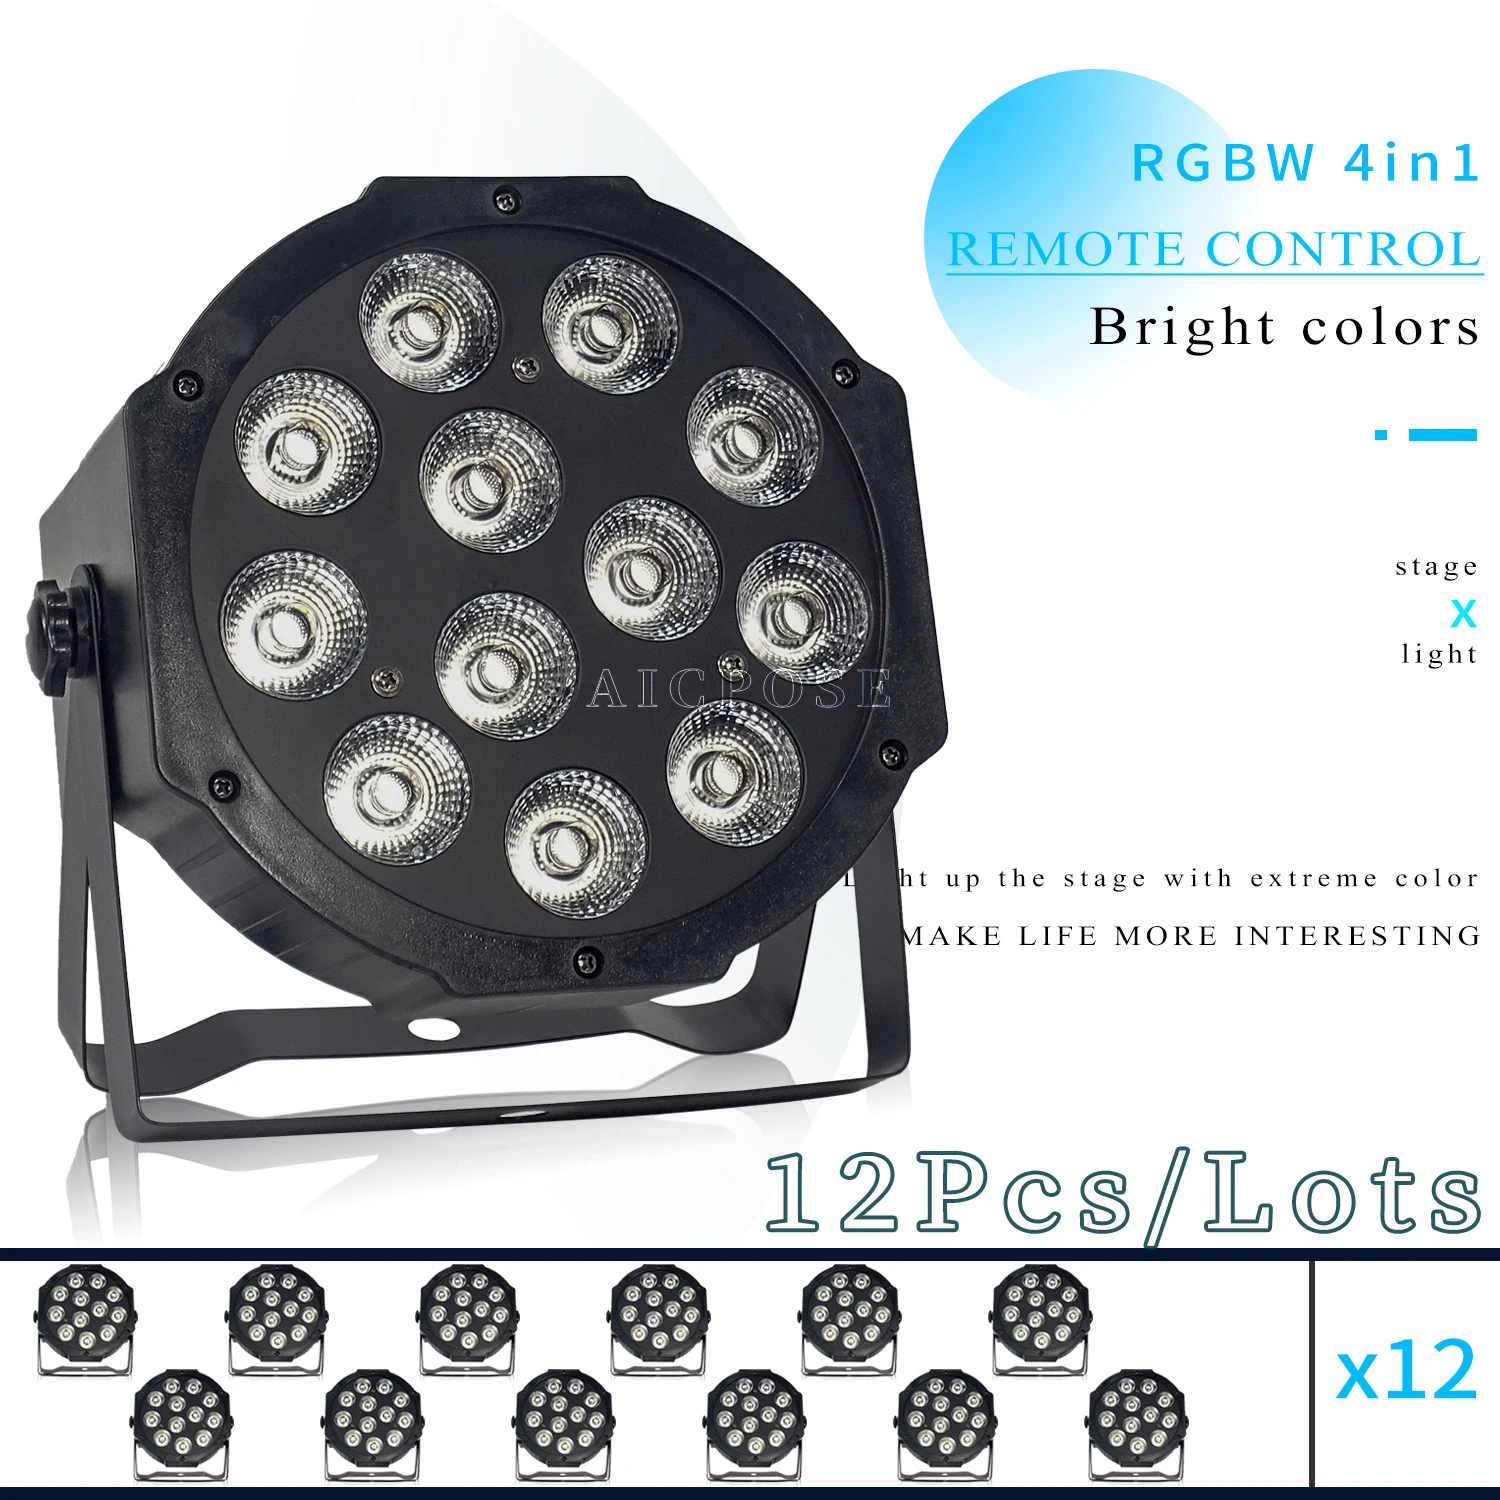 

12Pcs/Lots 12x12W RGBW 4 in 1 12x18W RGBWA+UV 6 in 1 LED Par Light Wireless Remote Control Stage Light for DJ Disco Party